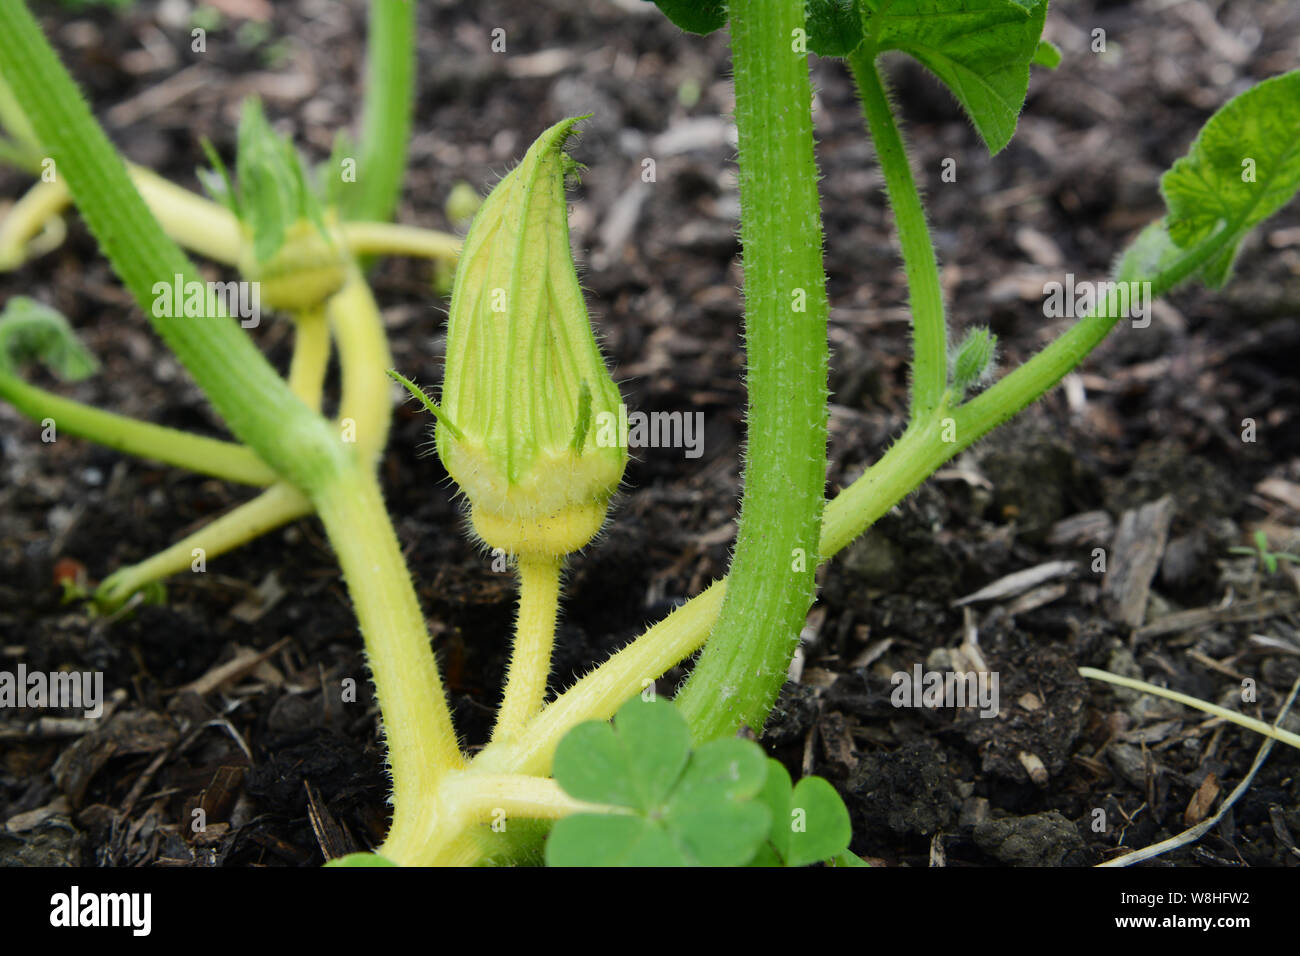 Close-up of a young Turks Turban gourd female flower among prickly cucurbit vines Stock Photo